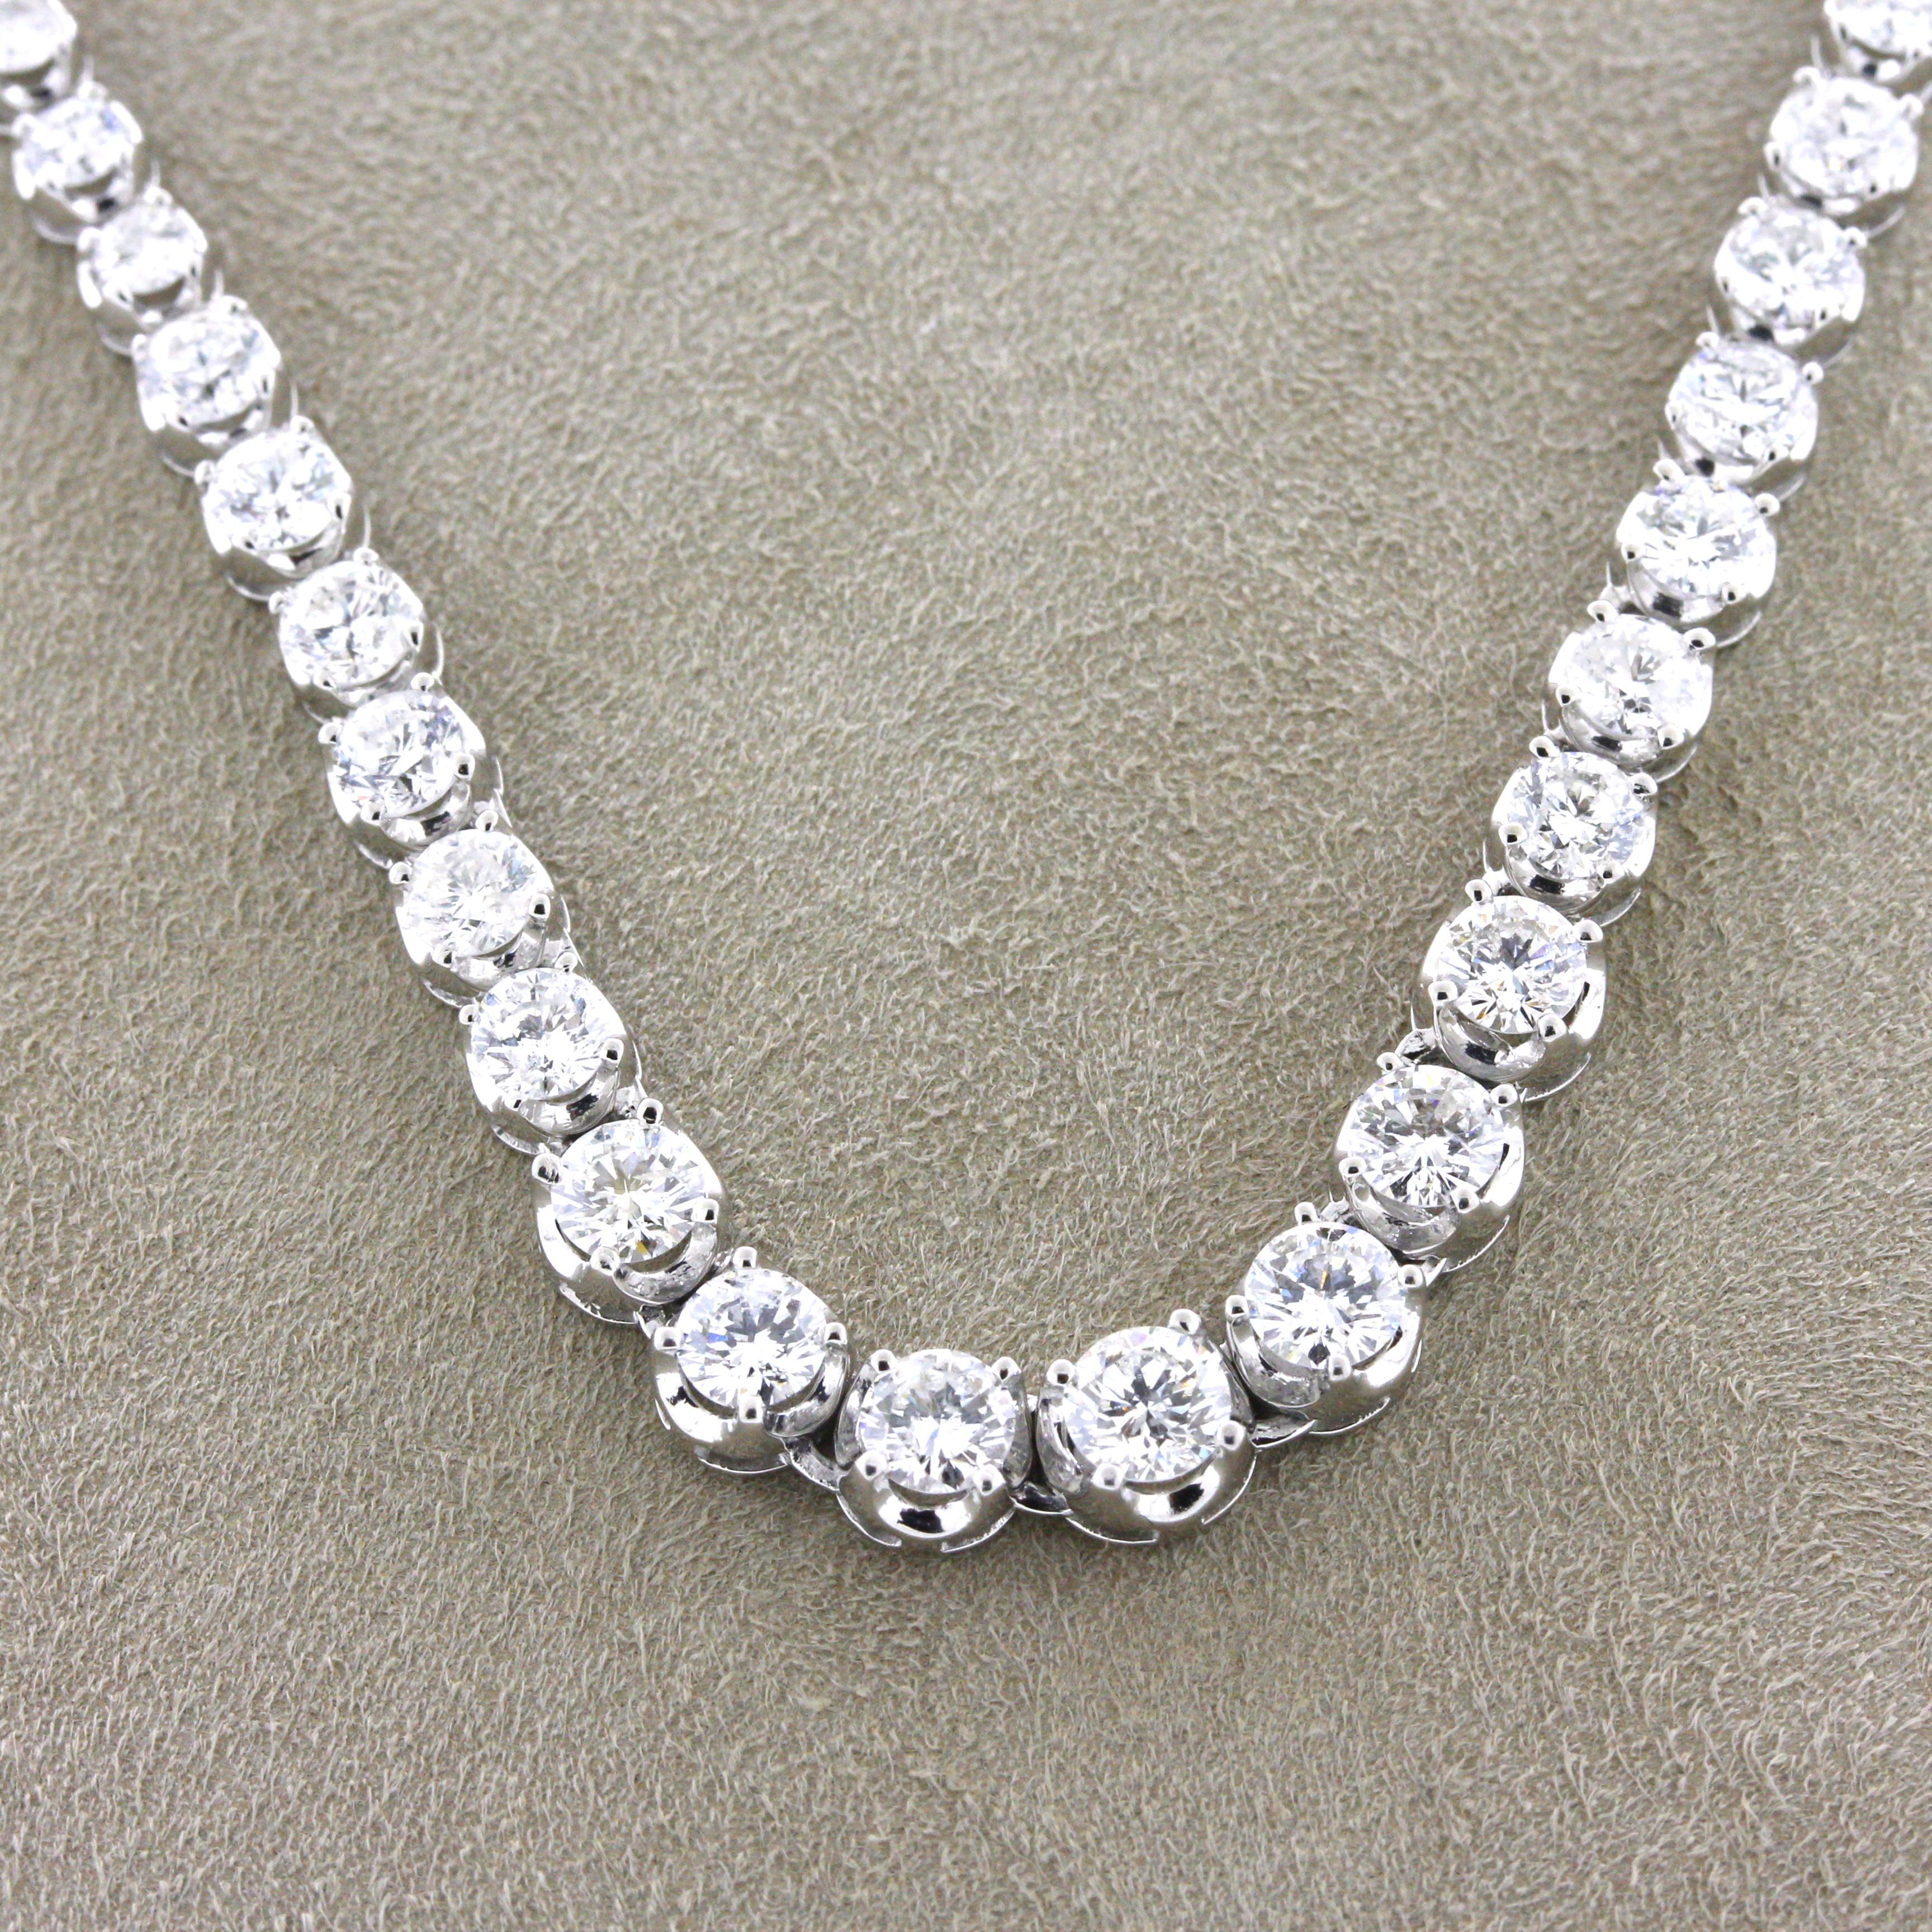 A lovely platinum made tennis necklace featuring 10.00 carats of round brilliant-cut diamonds. The largest diamonds in the center of the necklace weigh about a quarter carat and graduate slightly on the ends. Hand-fabricated in platinum, a classy